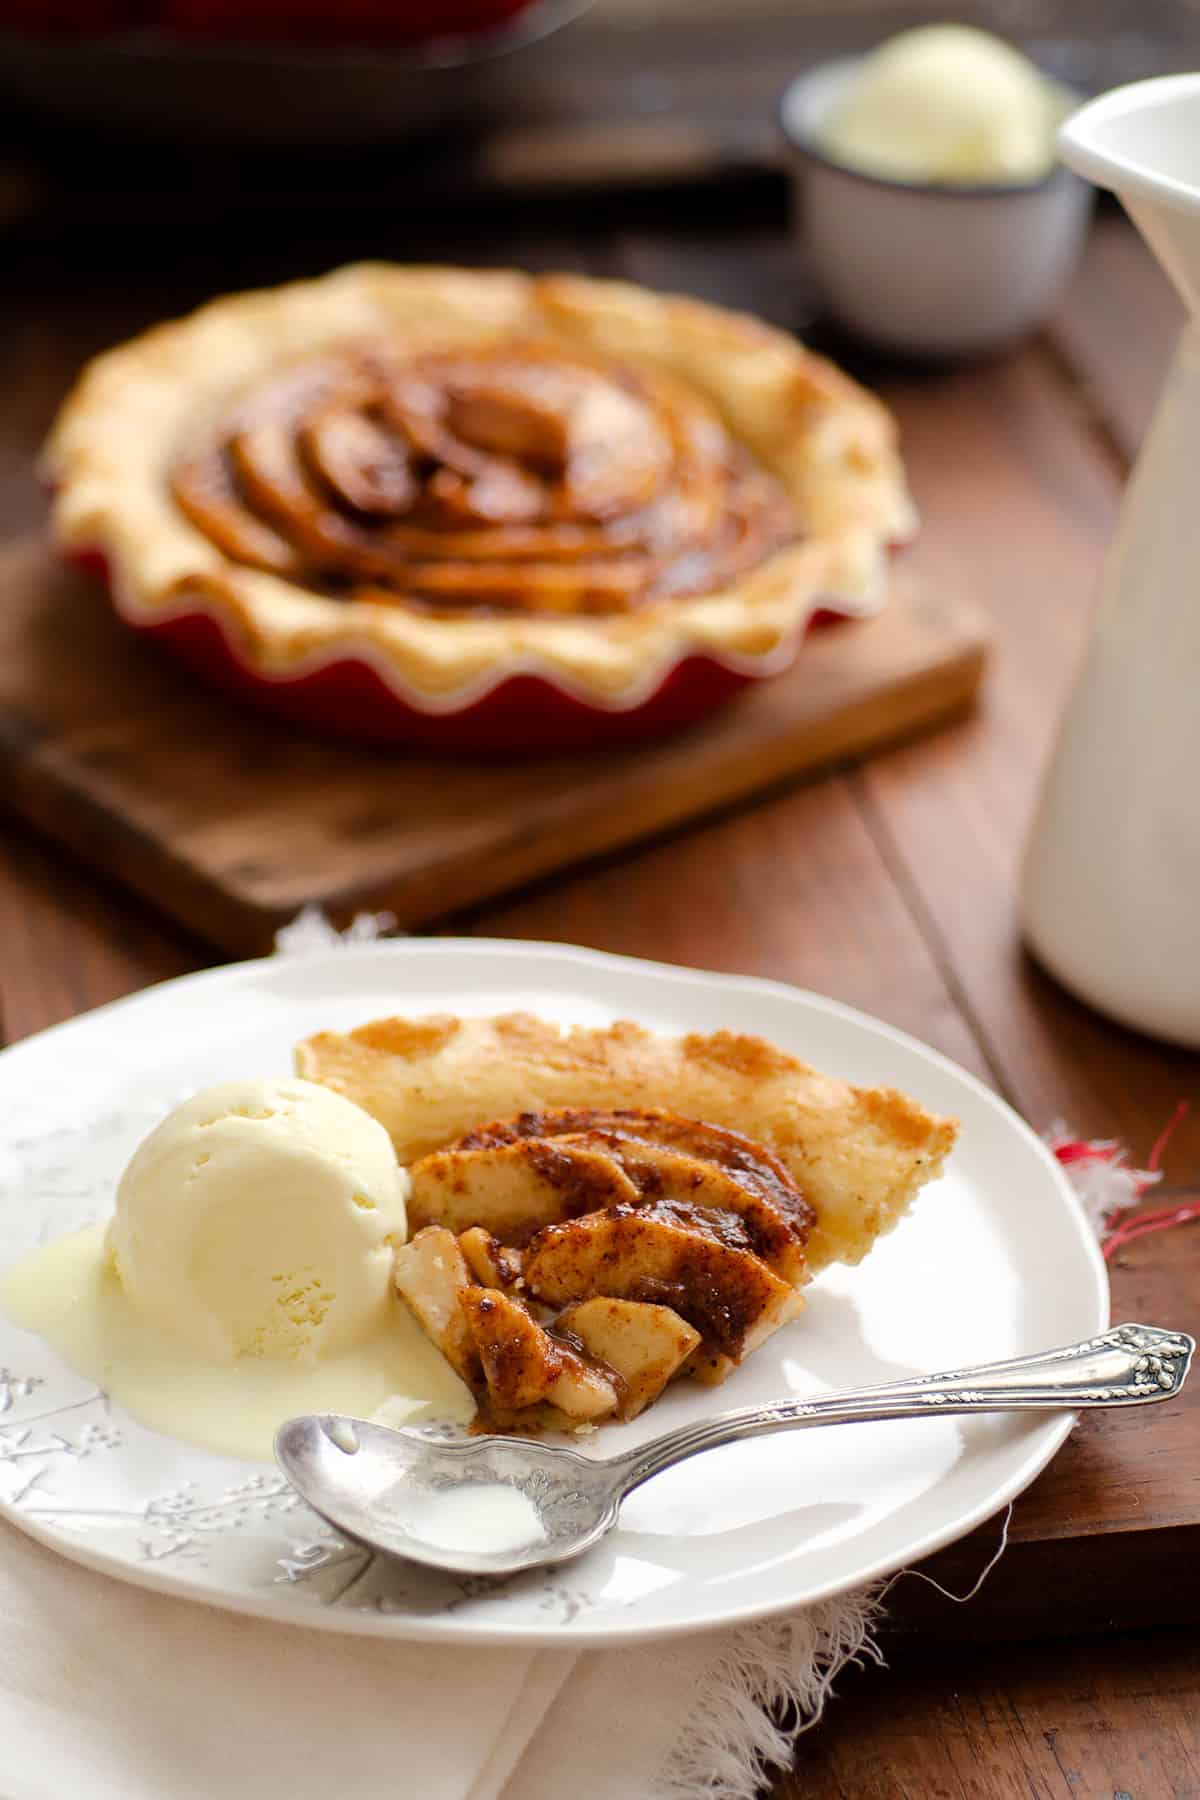 Spiced apple pie with ginger.